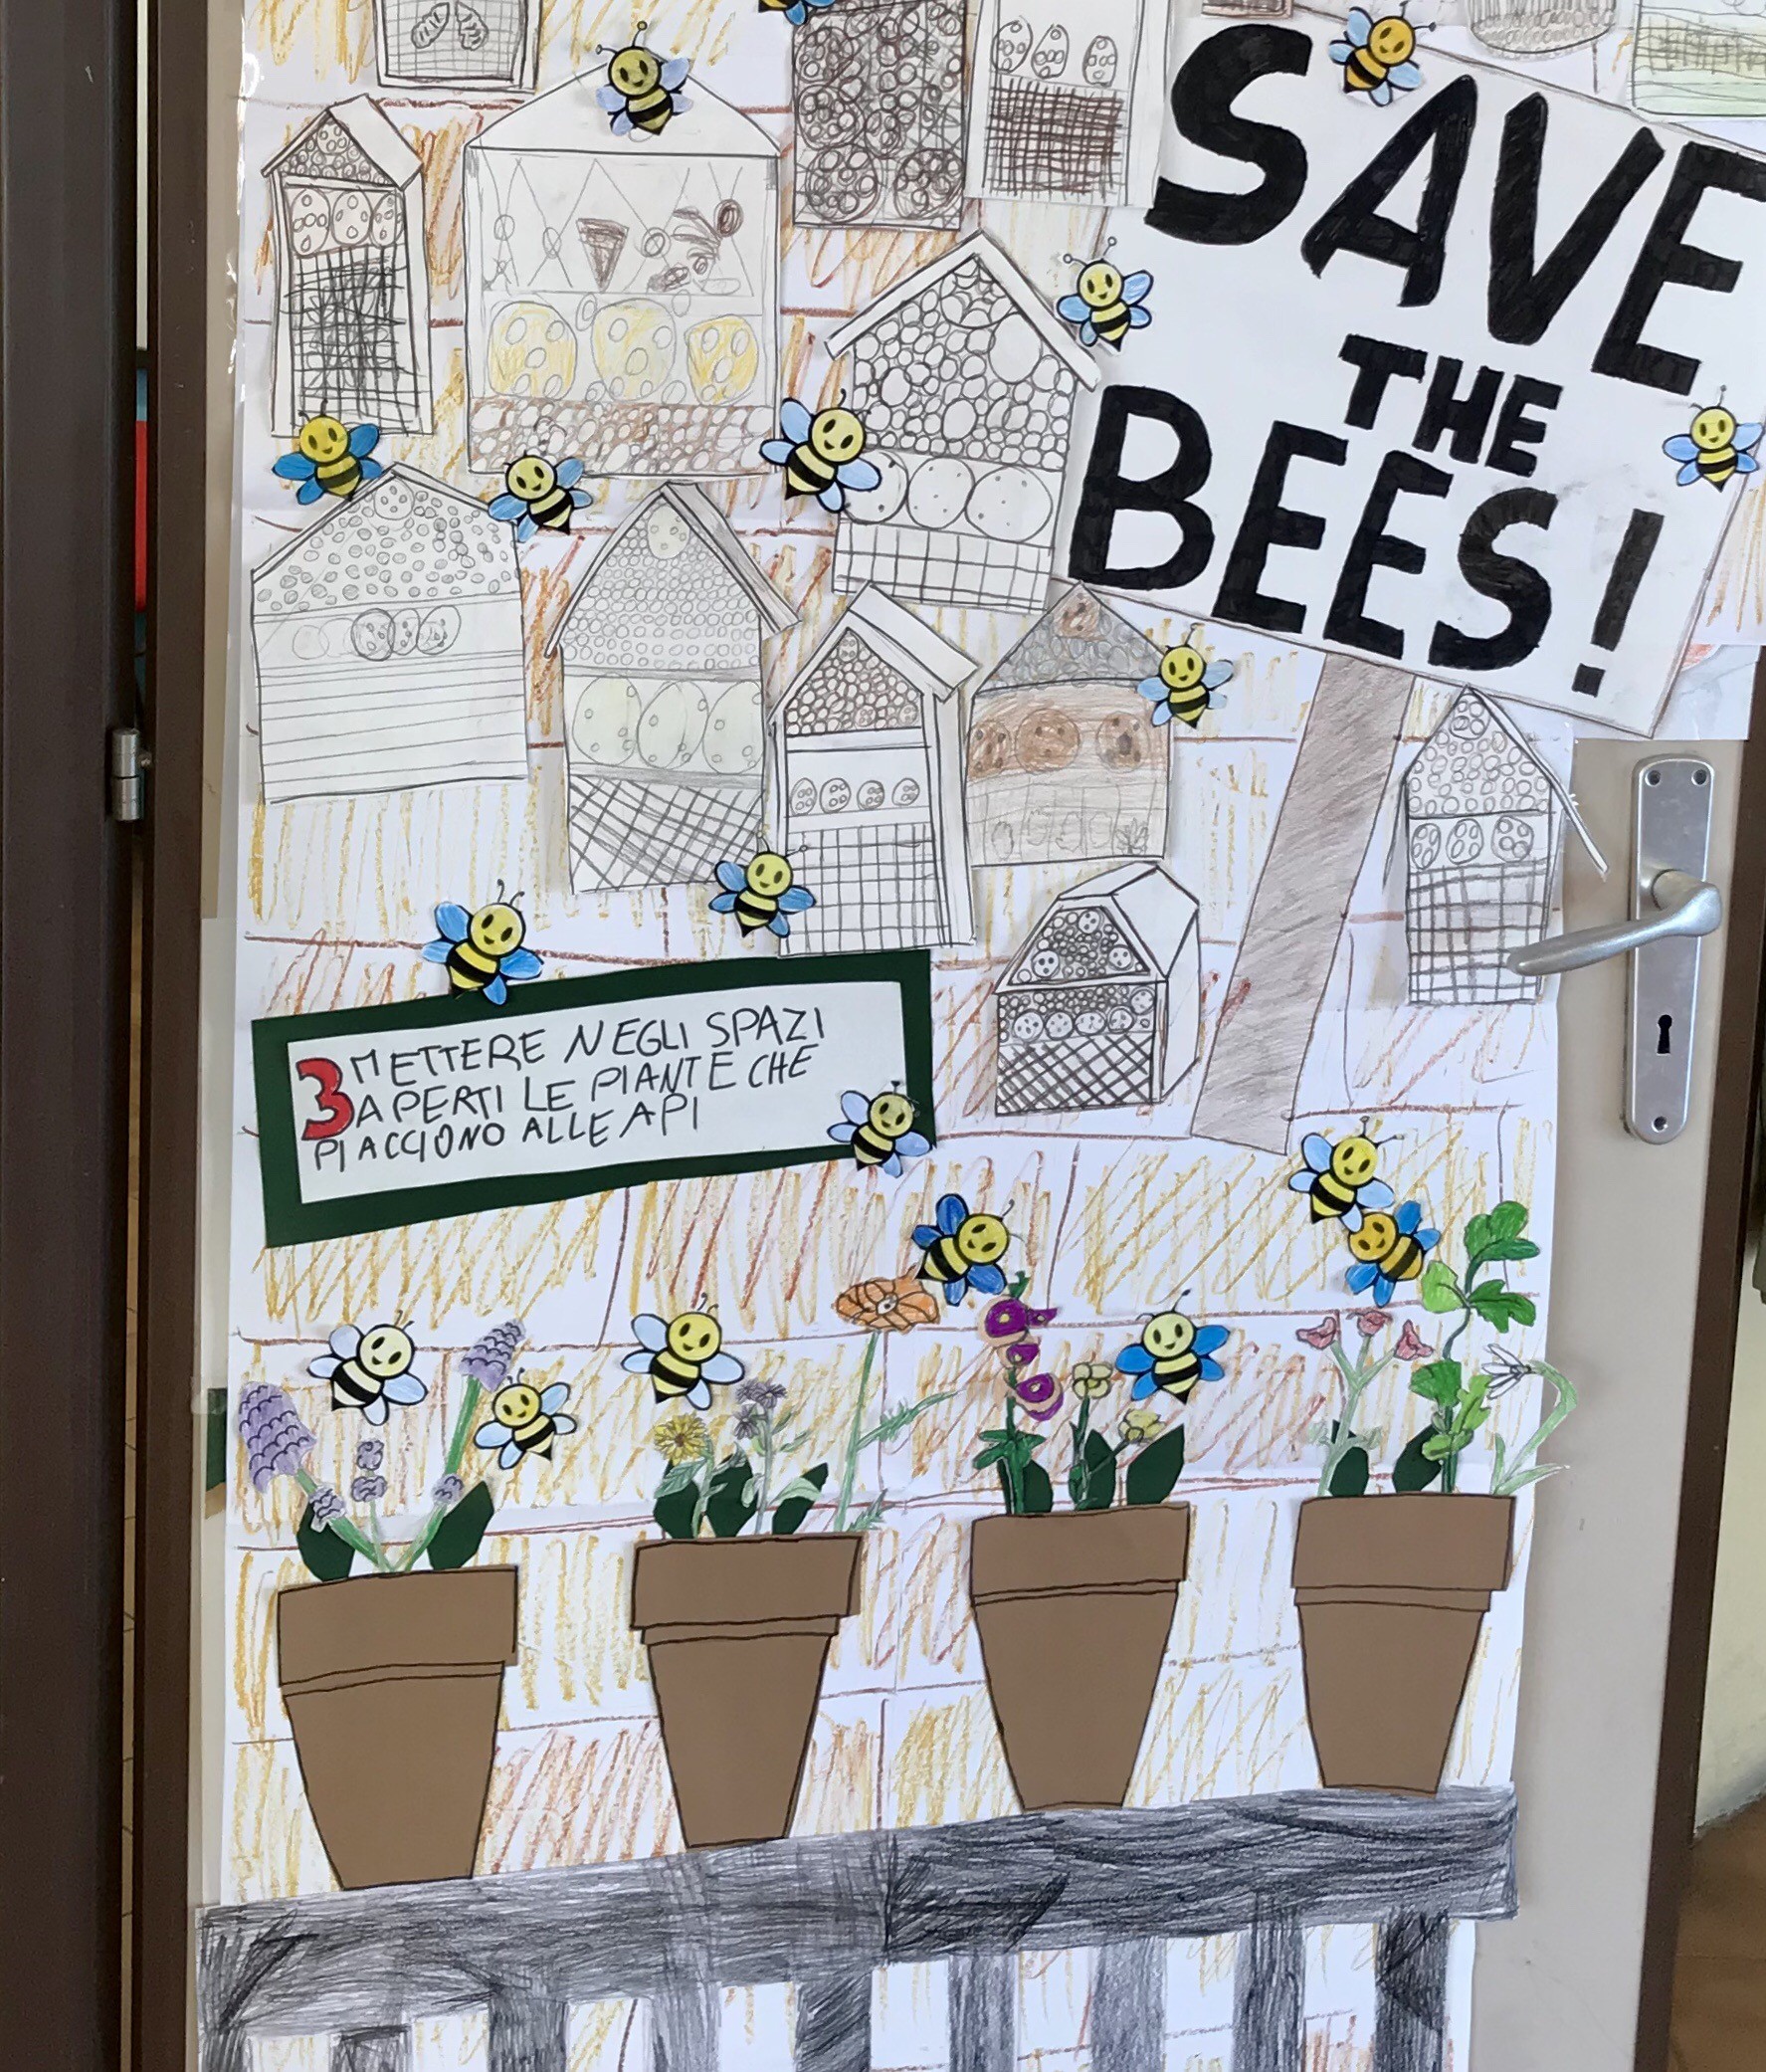 Save the bees! Parte inferiore